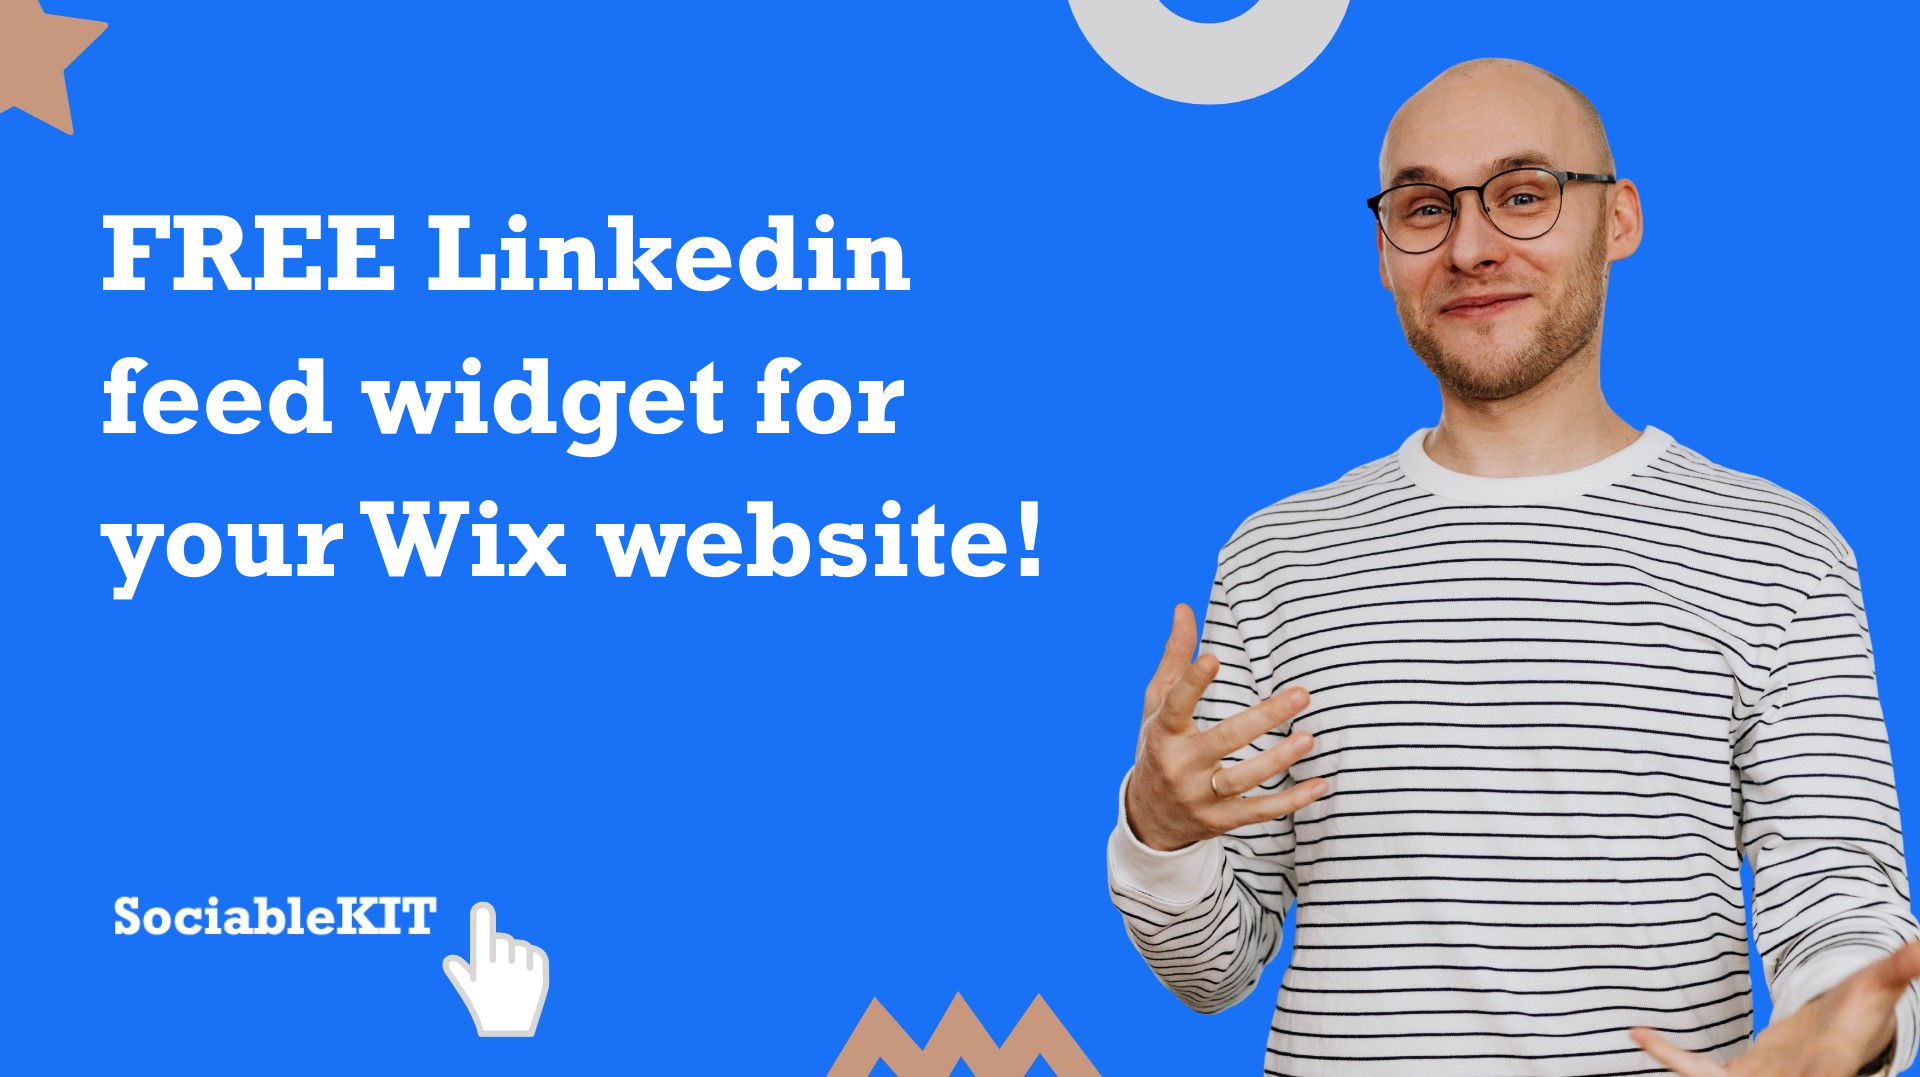 Free Linkedin feed widget for your Wix website